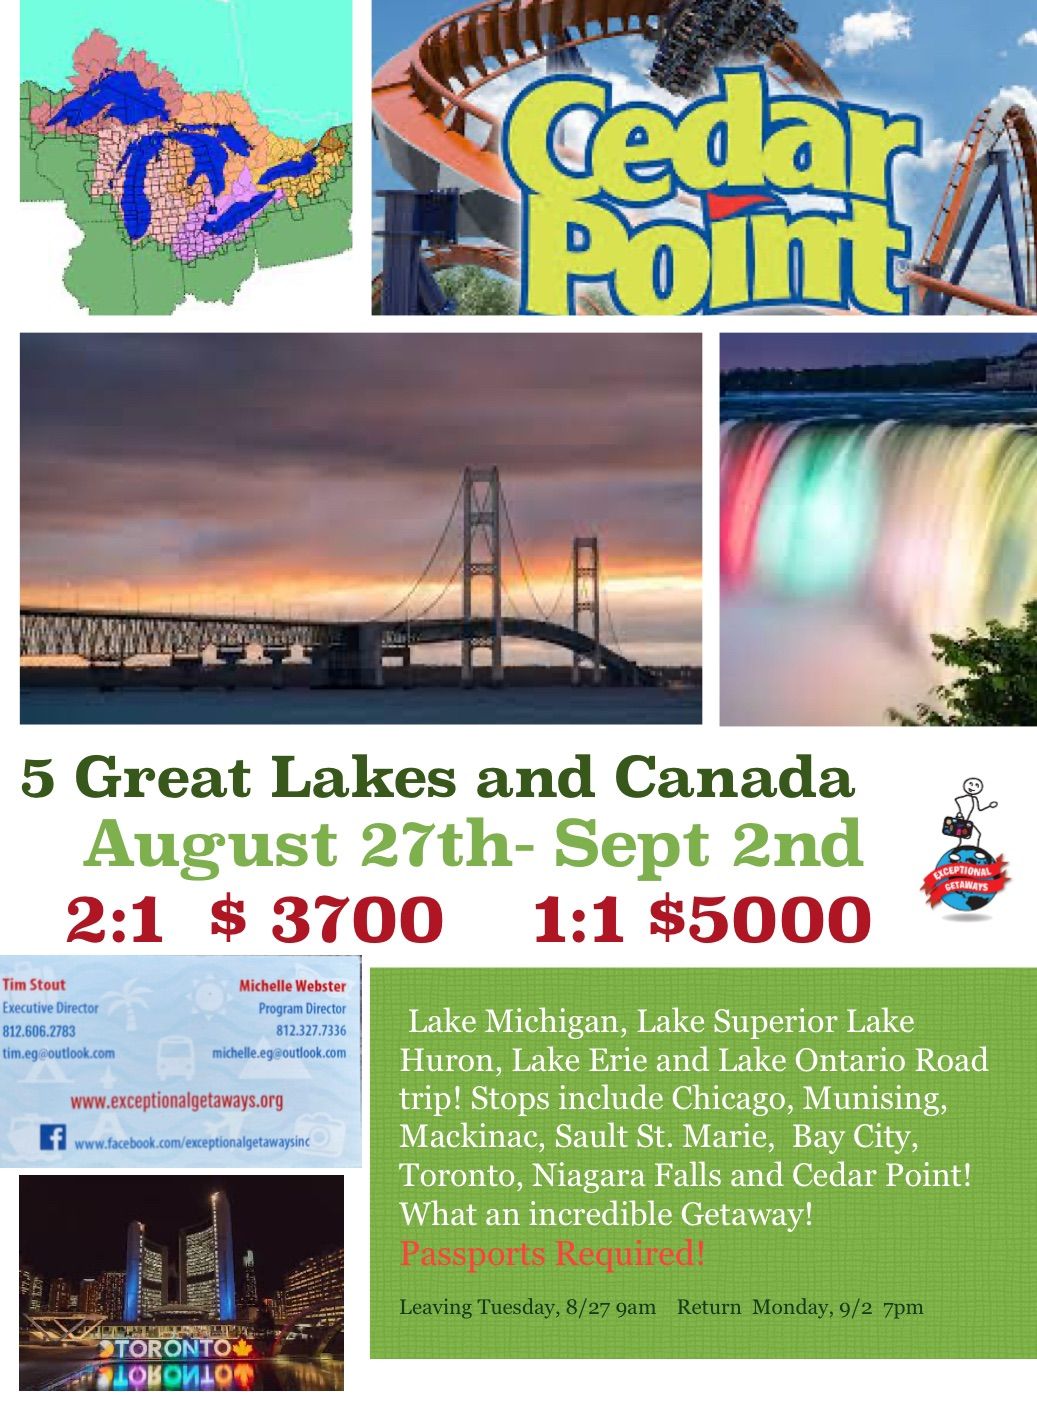 5 Great Lakes through Canada